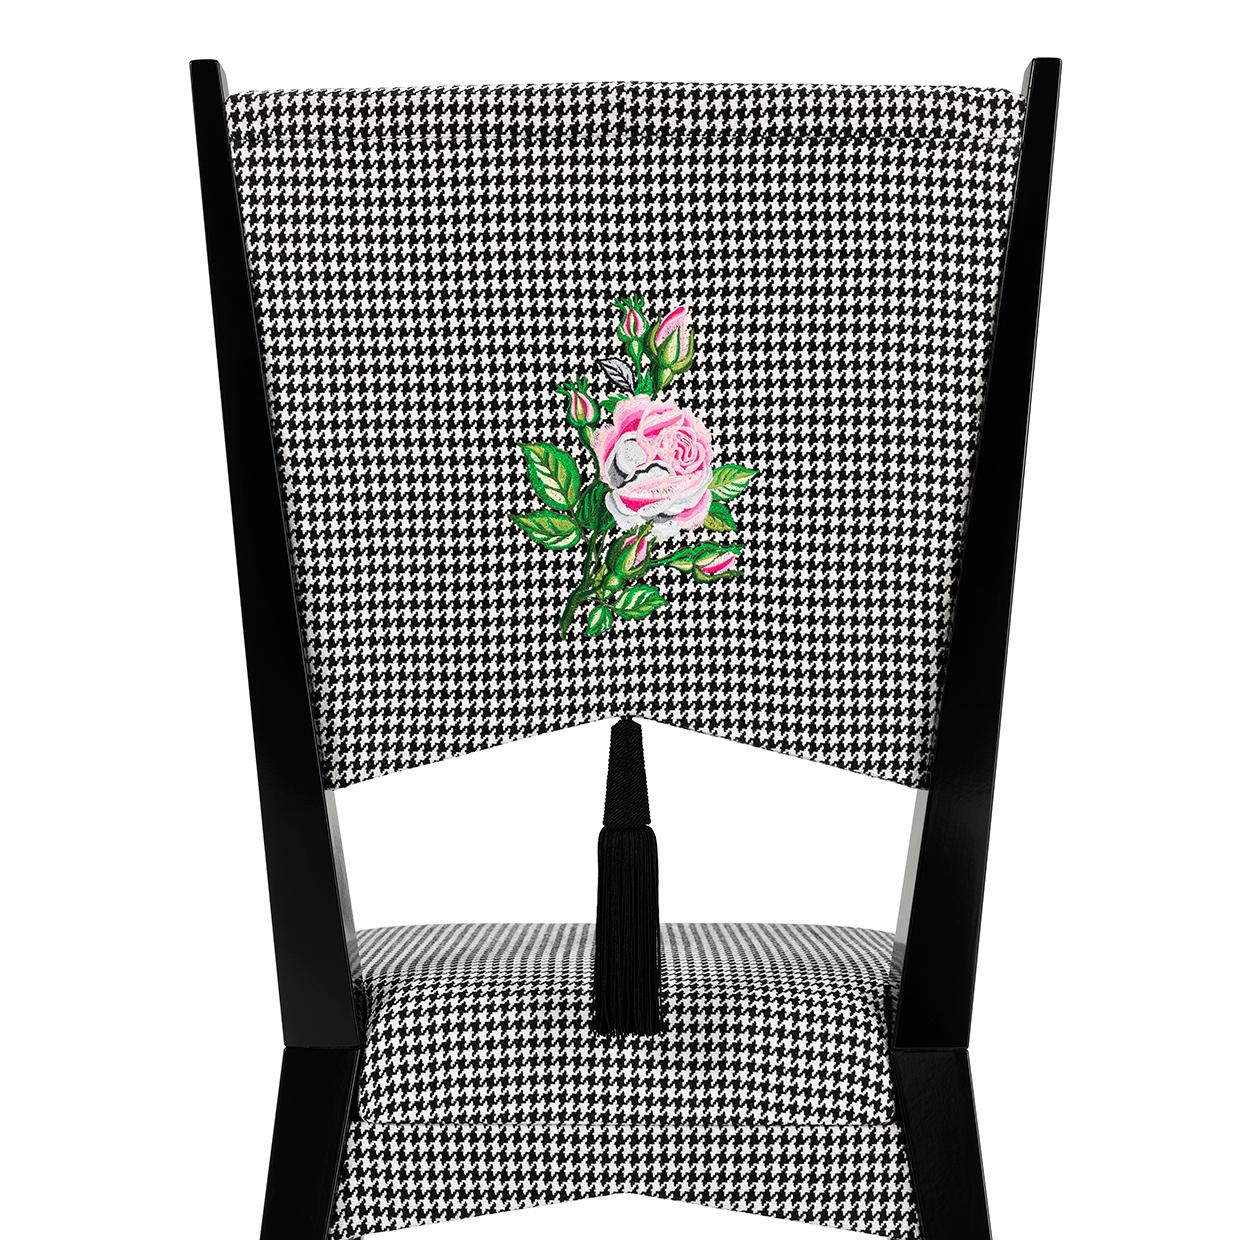 Contemporary Chair in Black and White Dedar Fabric Embroidered with Rose For Sale 1